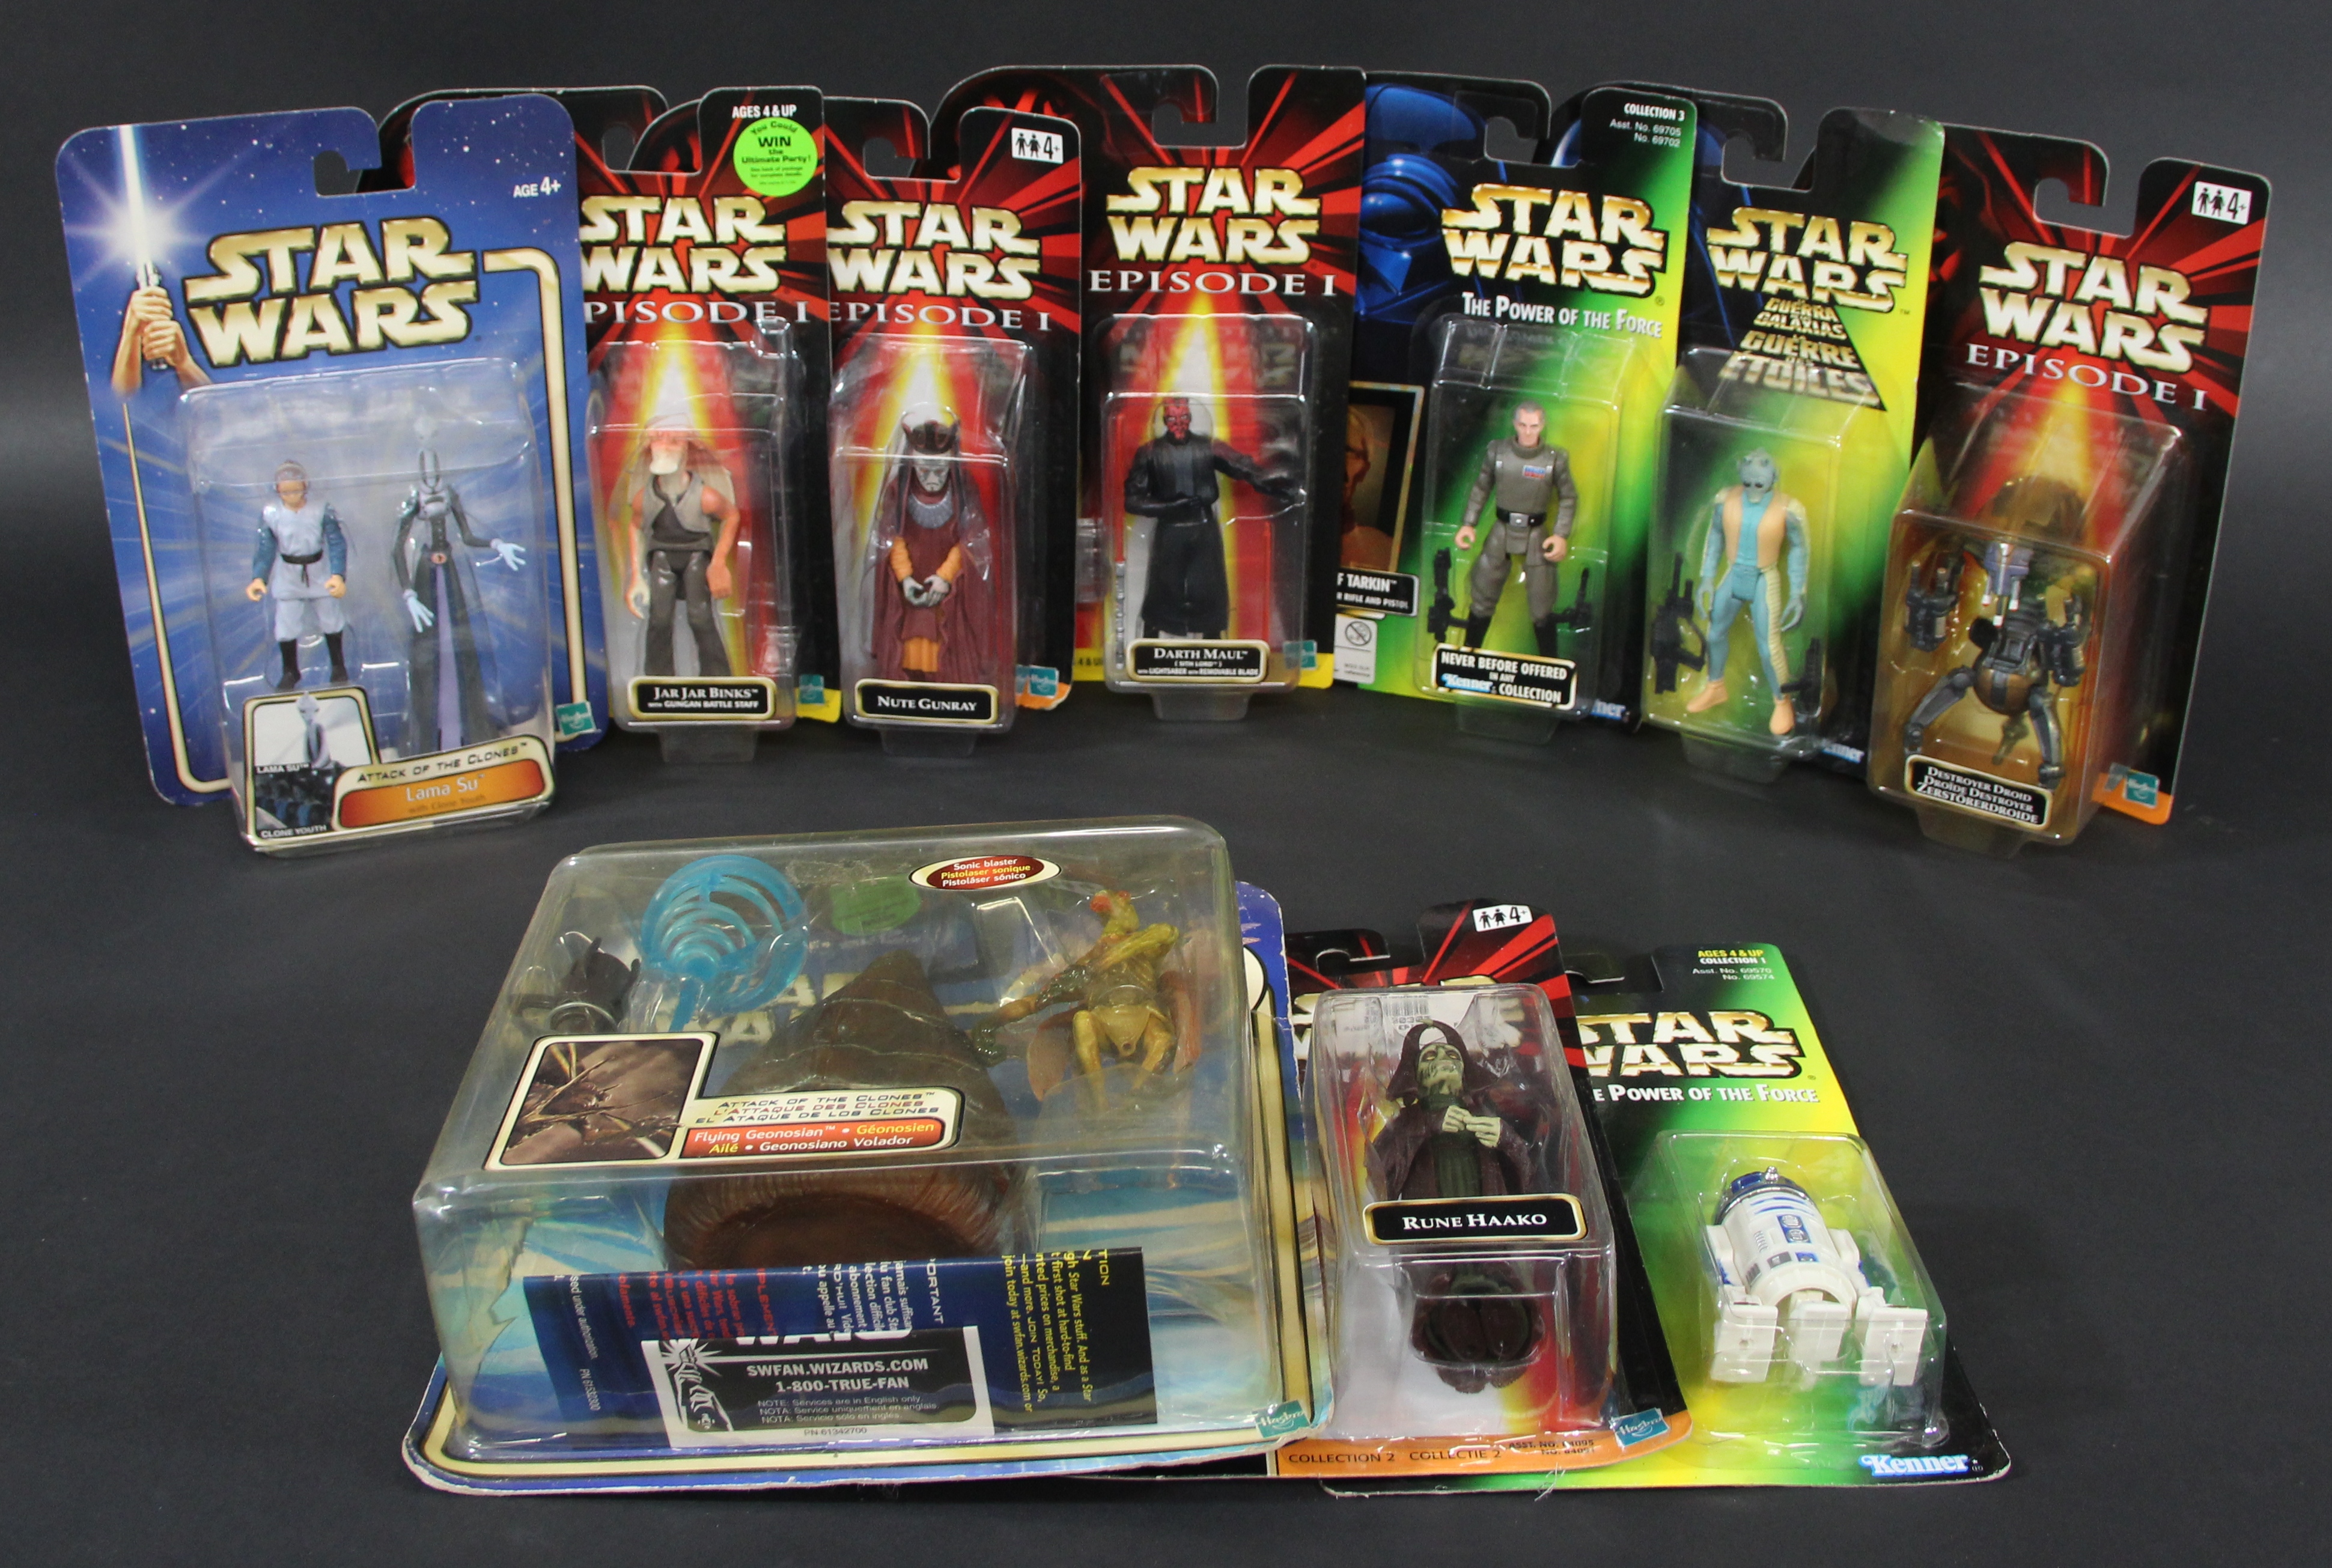 COLLECTION OF STAR WARS FIGURES approx 90 Star Wars figures mostly by Hasbro, all in their